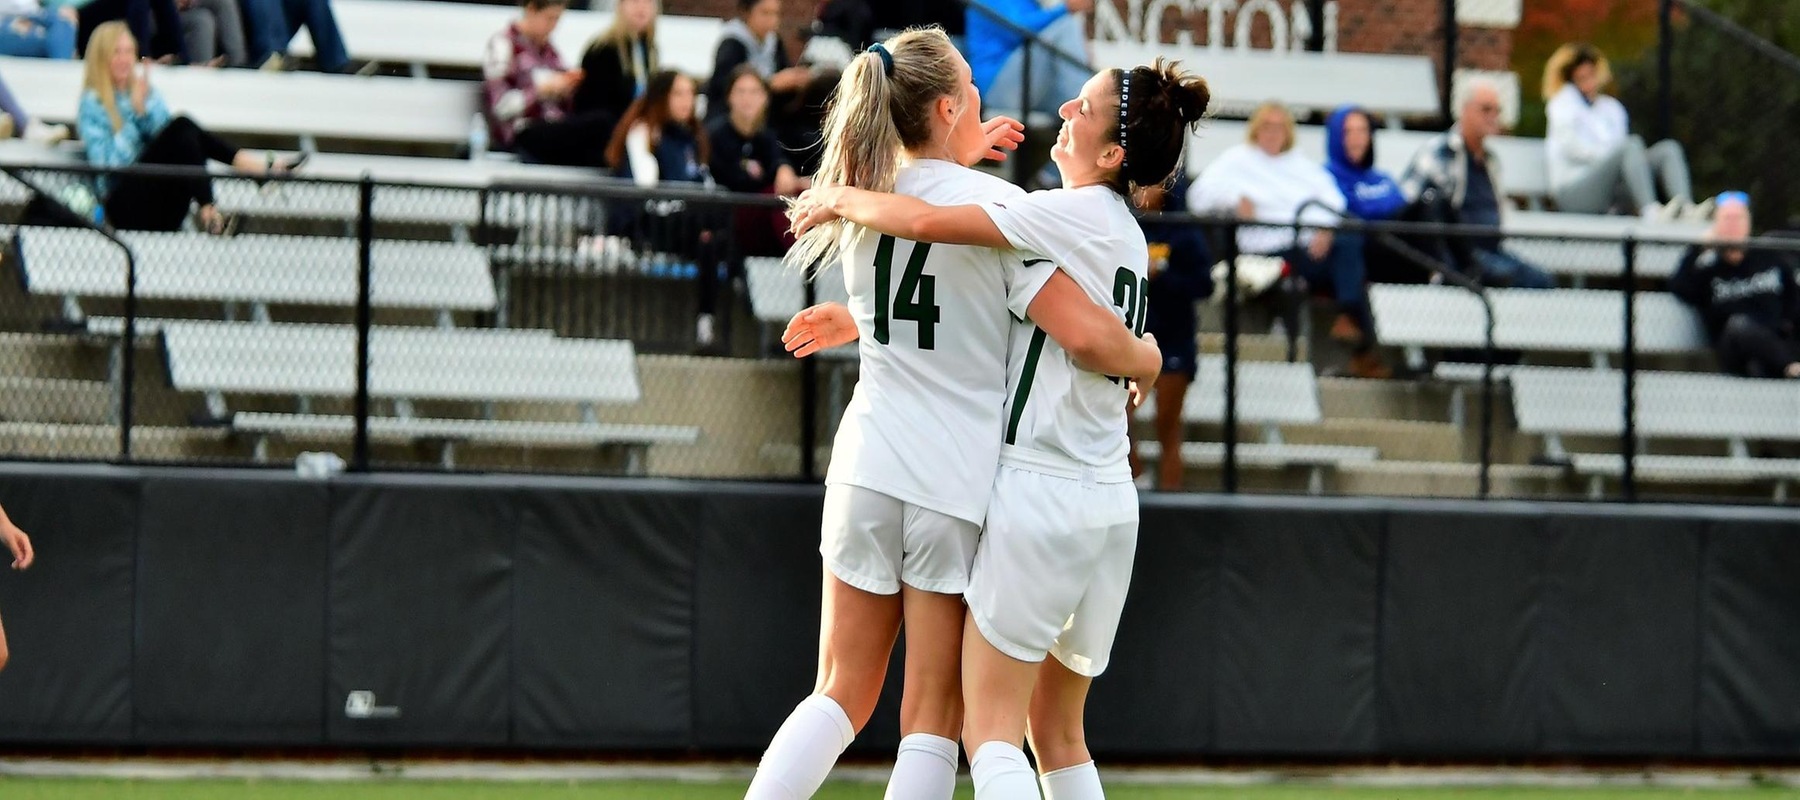 Photo of Lauren Hoelke (14) and Jimena Garcia Risoto (29) celebrating after Hoelke's second goal. Copyright 2021; Wilmington University. All rights reserved. Photo by James Jones. October 28, 2021 vs. Georgian Court.